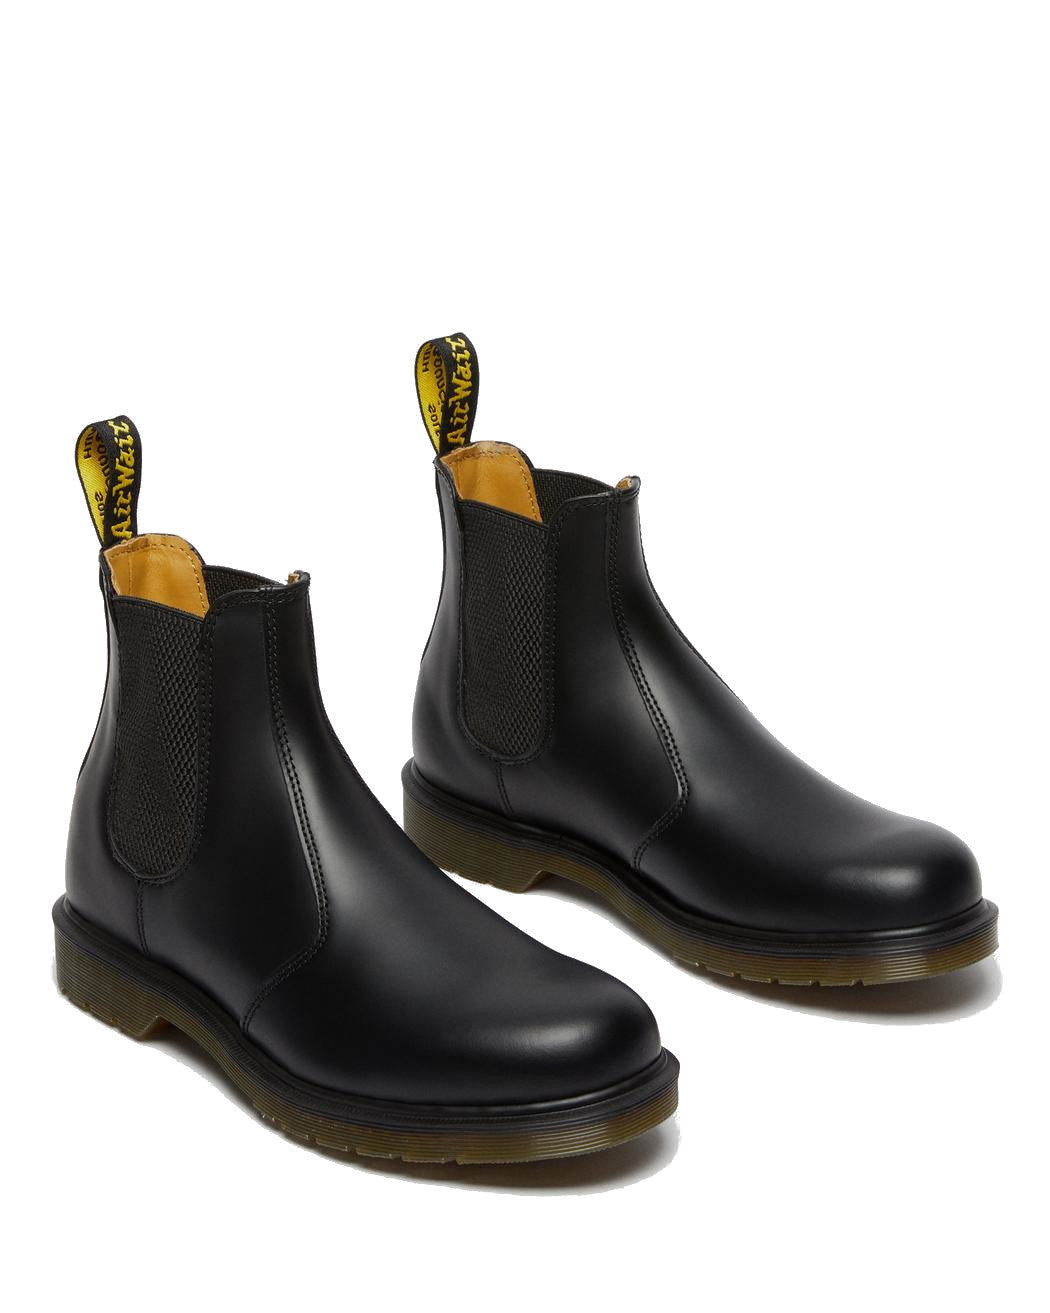 Kong Lear damper fure Dr. Martens Women's 2976 Smooth Leather Chelsea Boot - Black – Alamo Shoes